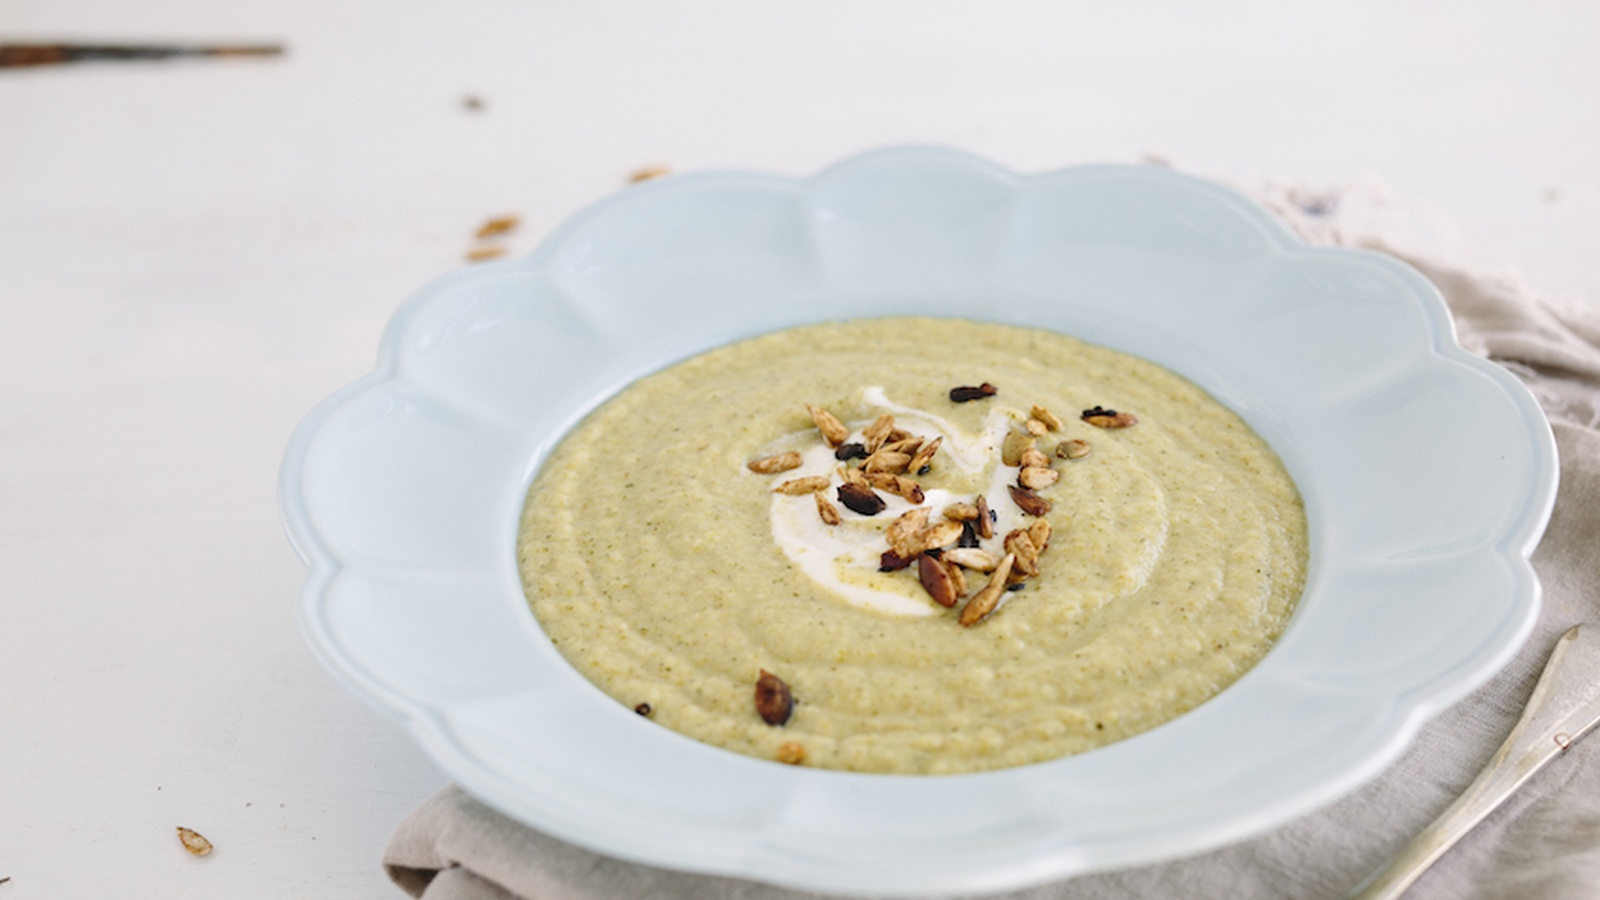 Broccoli Rabe Soup With Crunchy Spiced Seeds